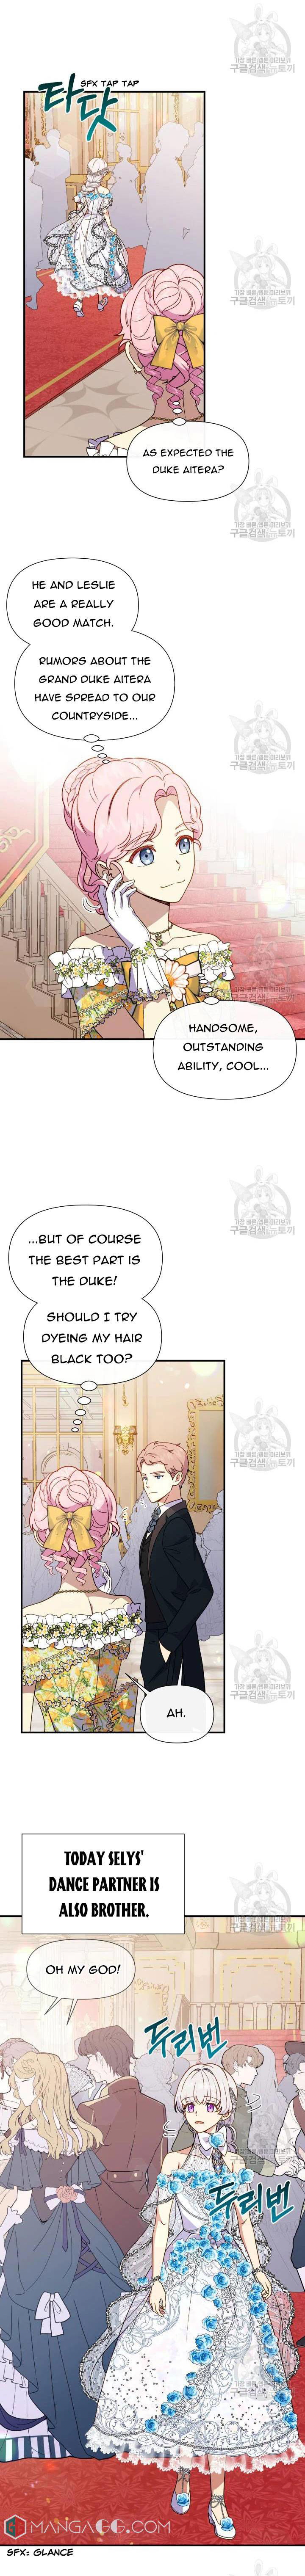 The Monster Duchess and Contract Princess Chapter 130 page 5